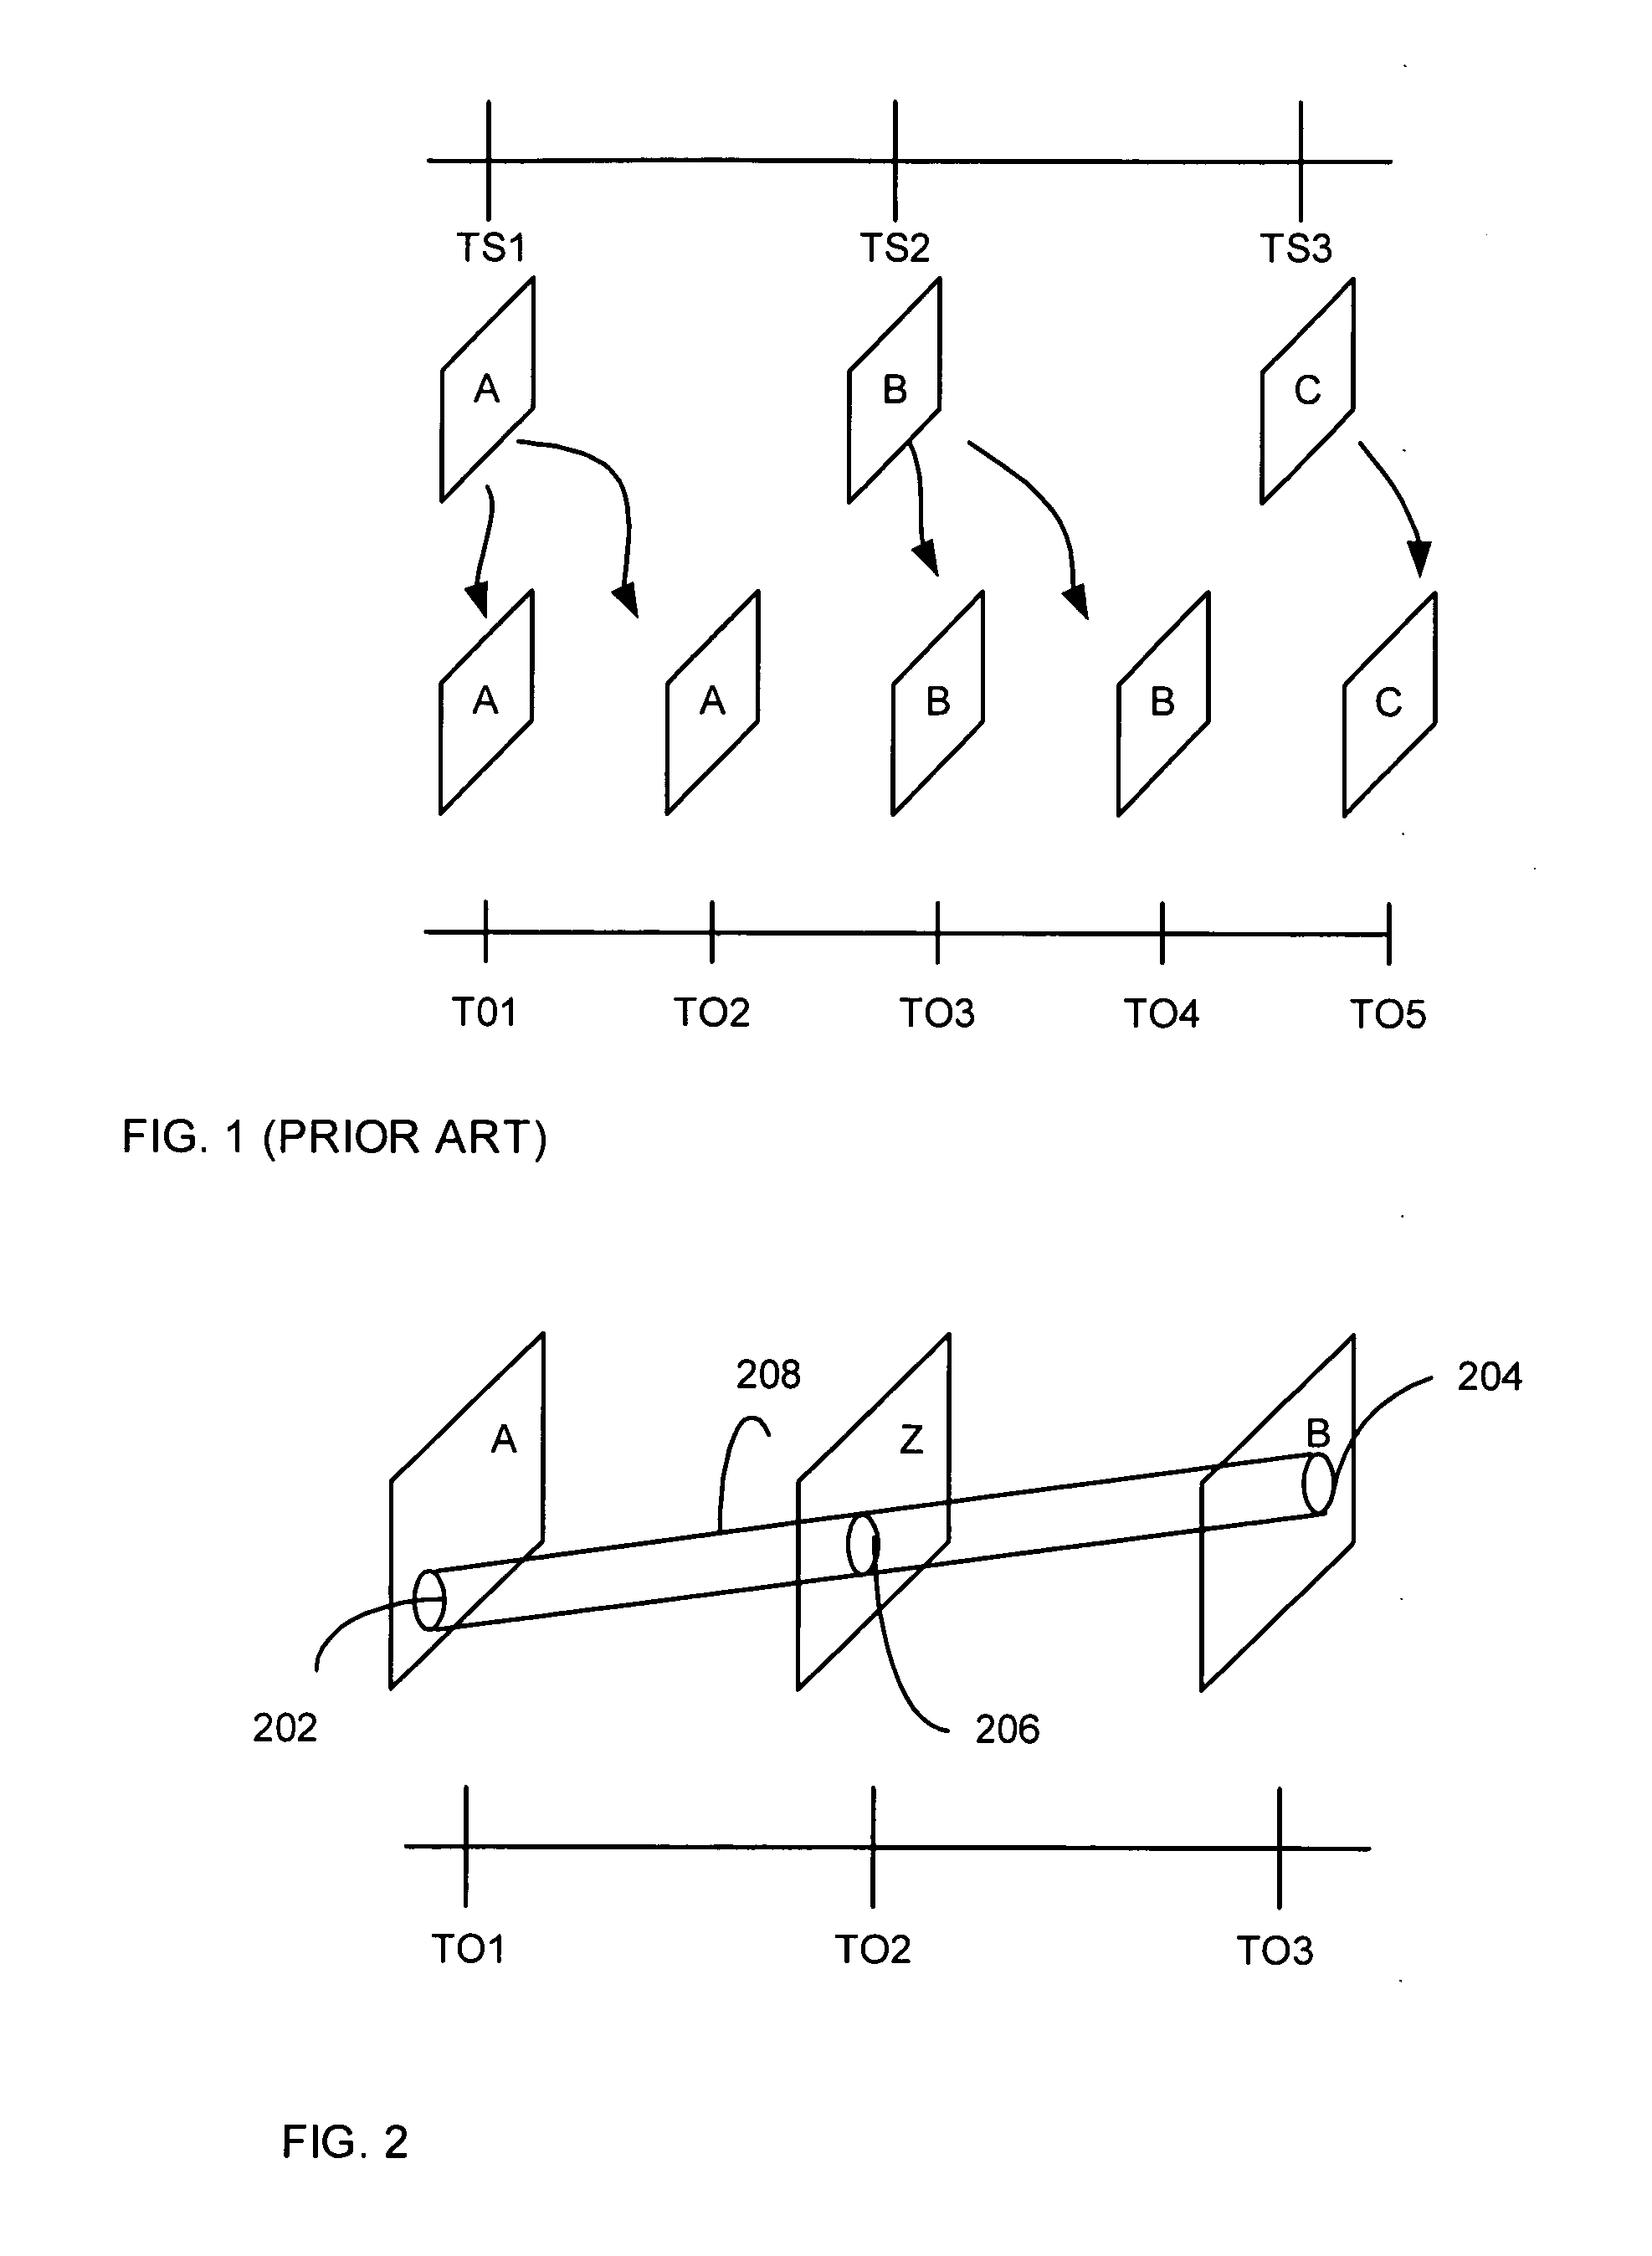 Apparatus and method for single-pass, gradient-based motion compensated image rate conversion